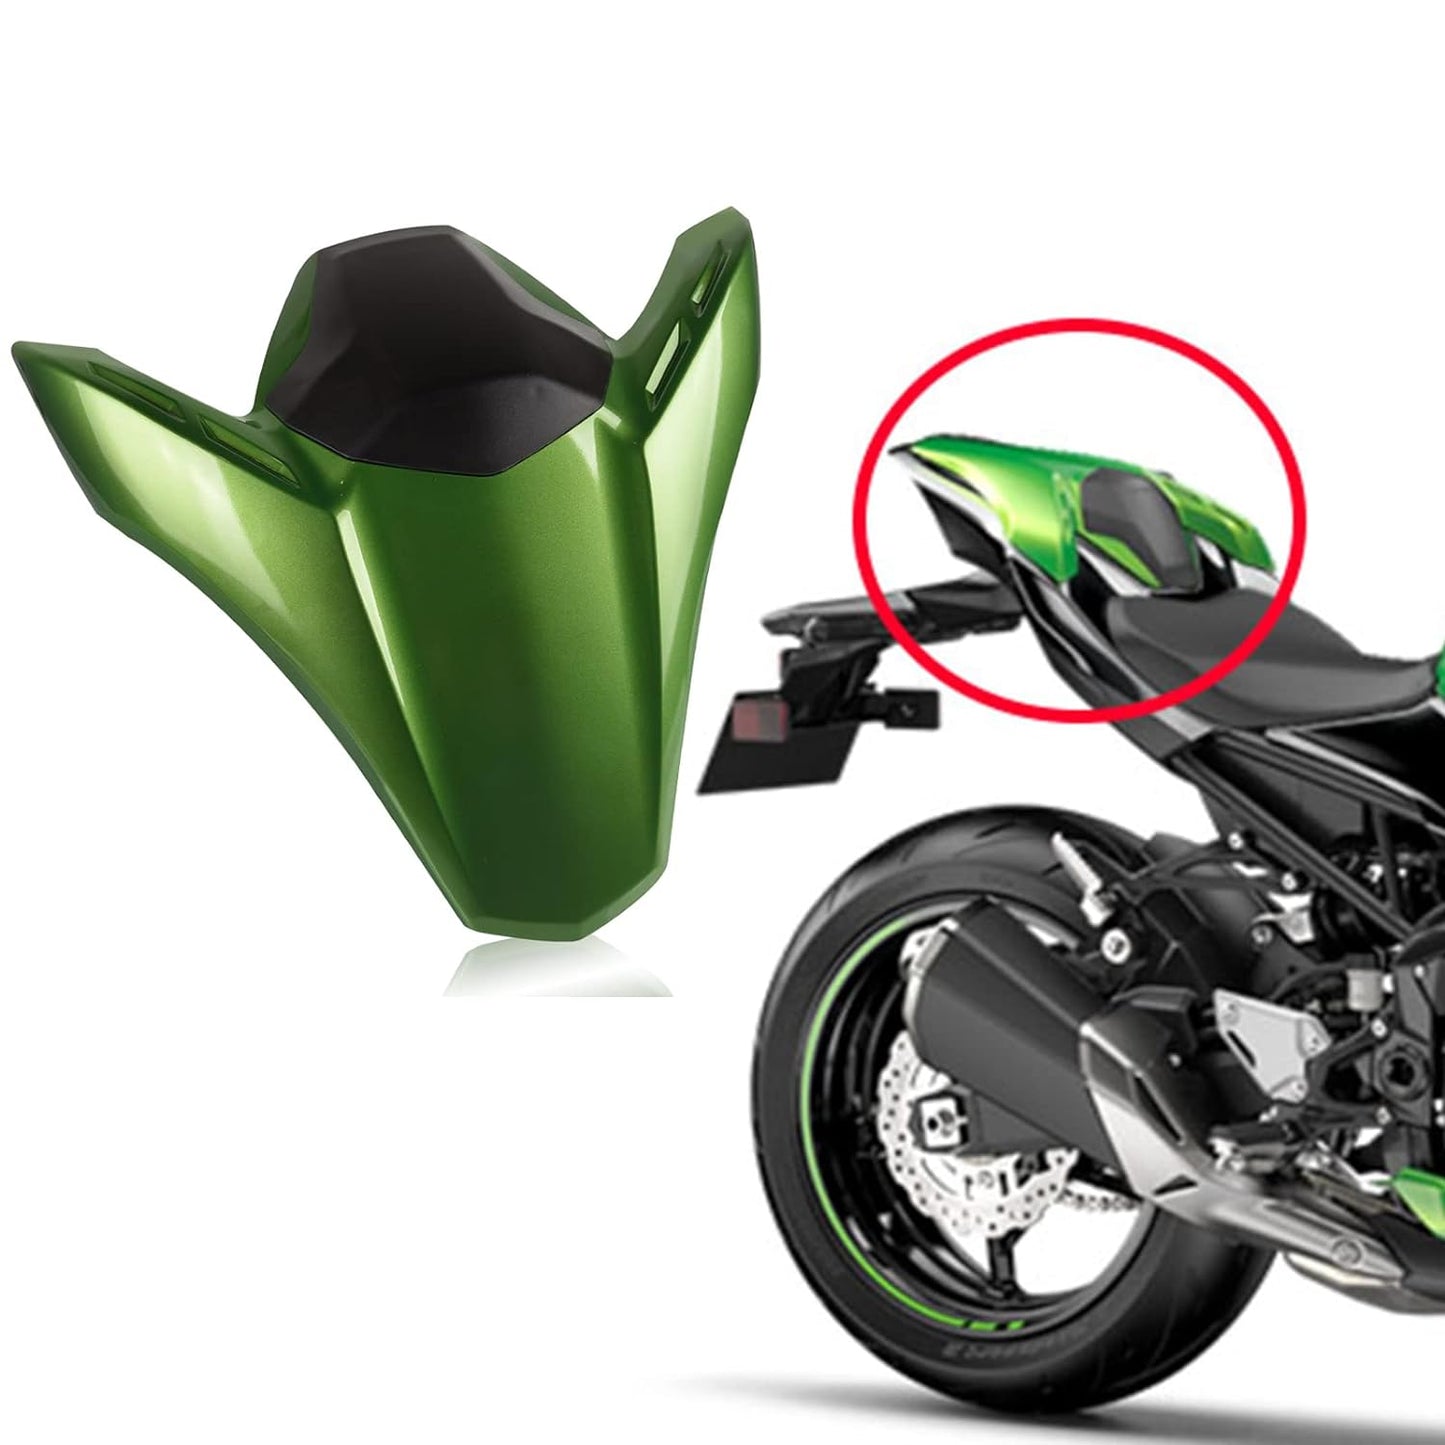 kawasaki  Motorcycle Accessories Hump Rear Seat Cover Fairing Cowl Back Cover For Z900 Z 900 2017 2018 2019 2020 (Green)